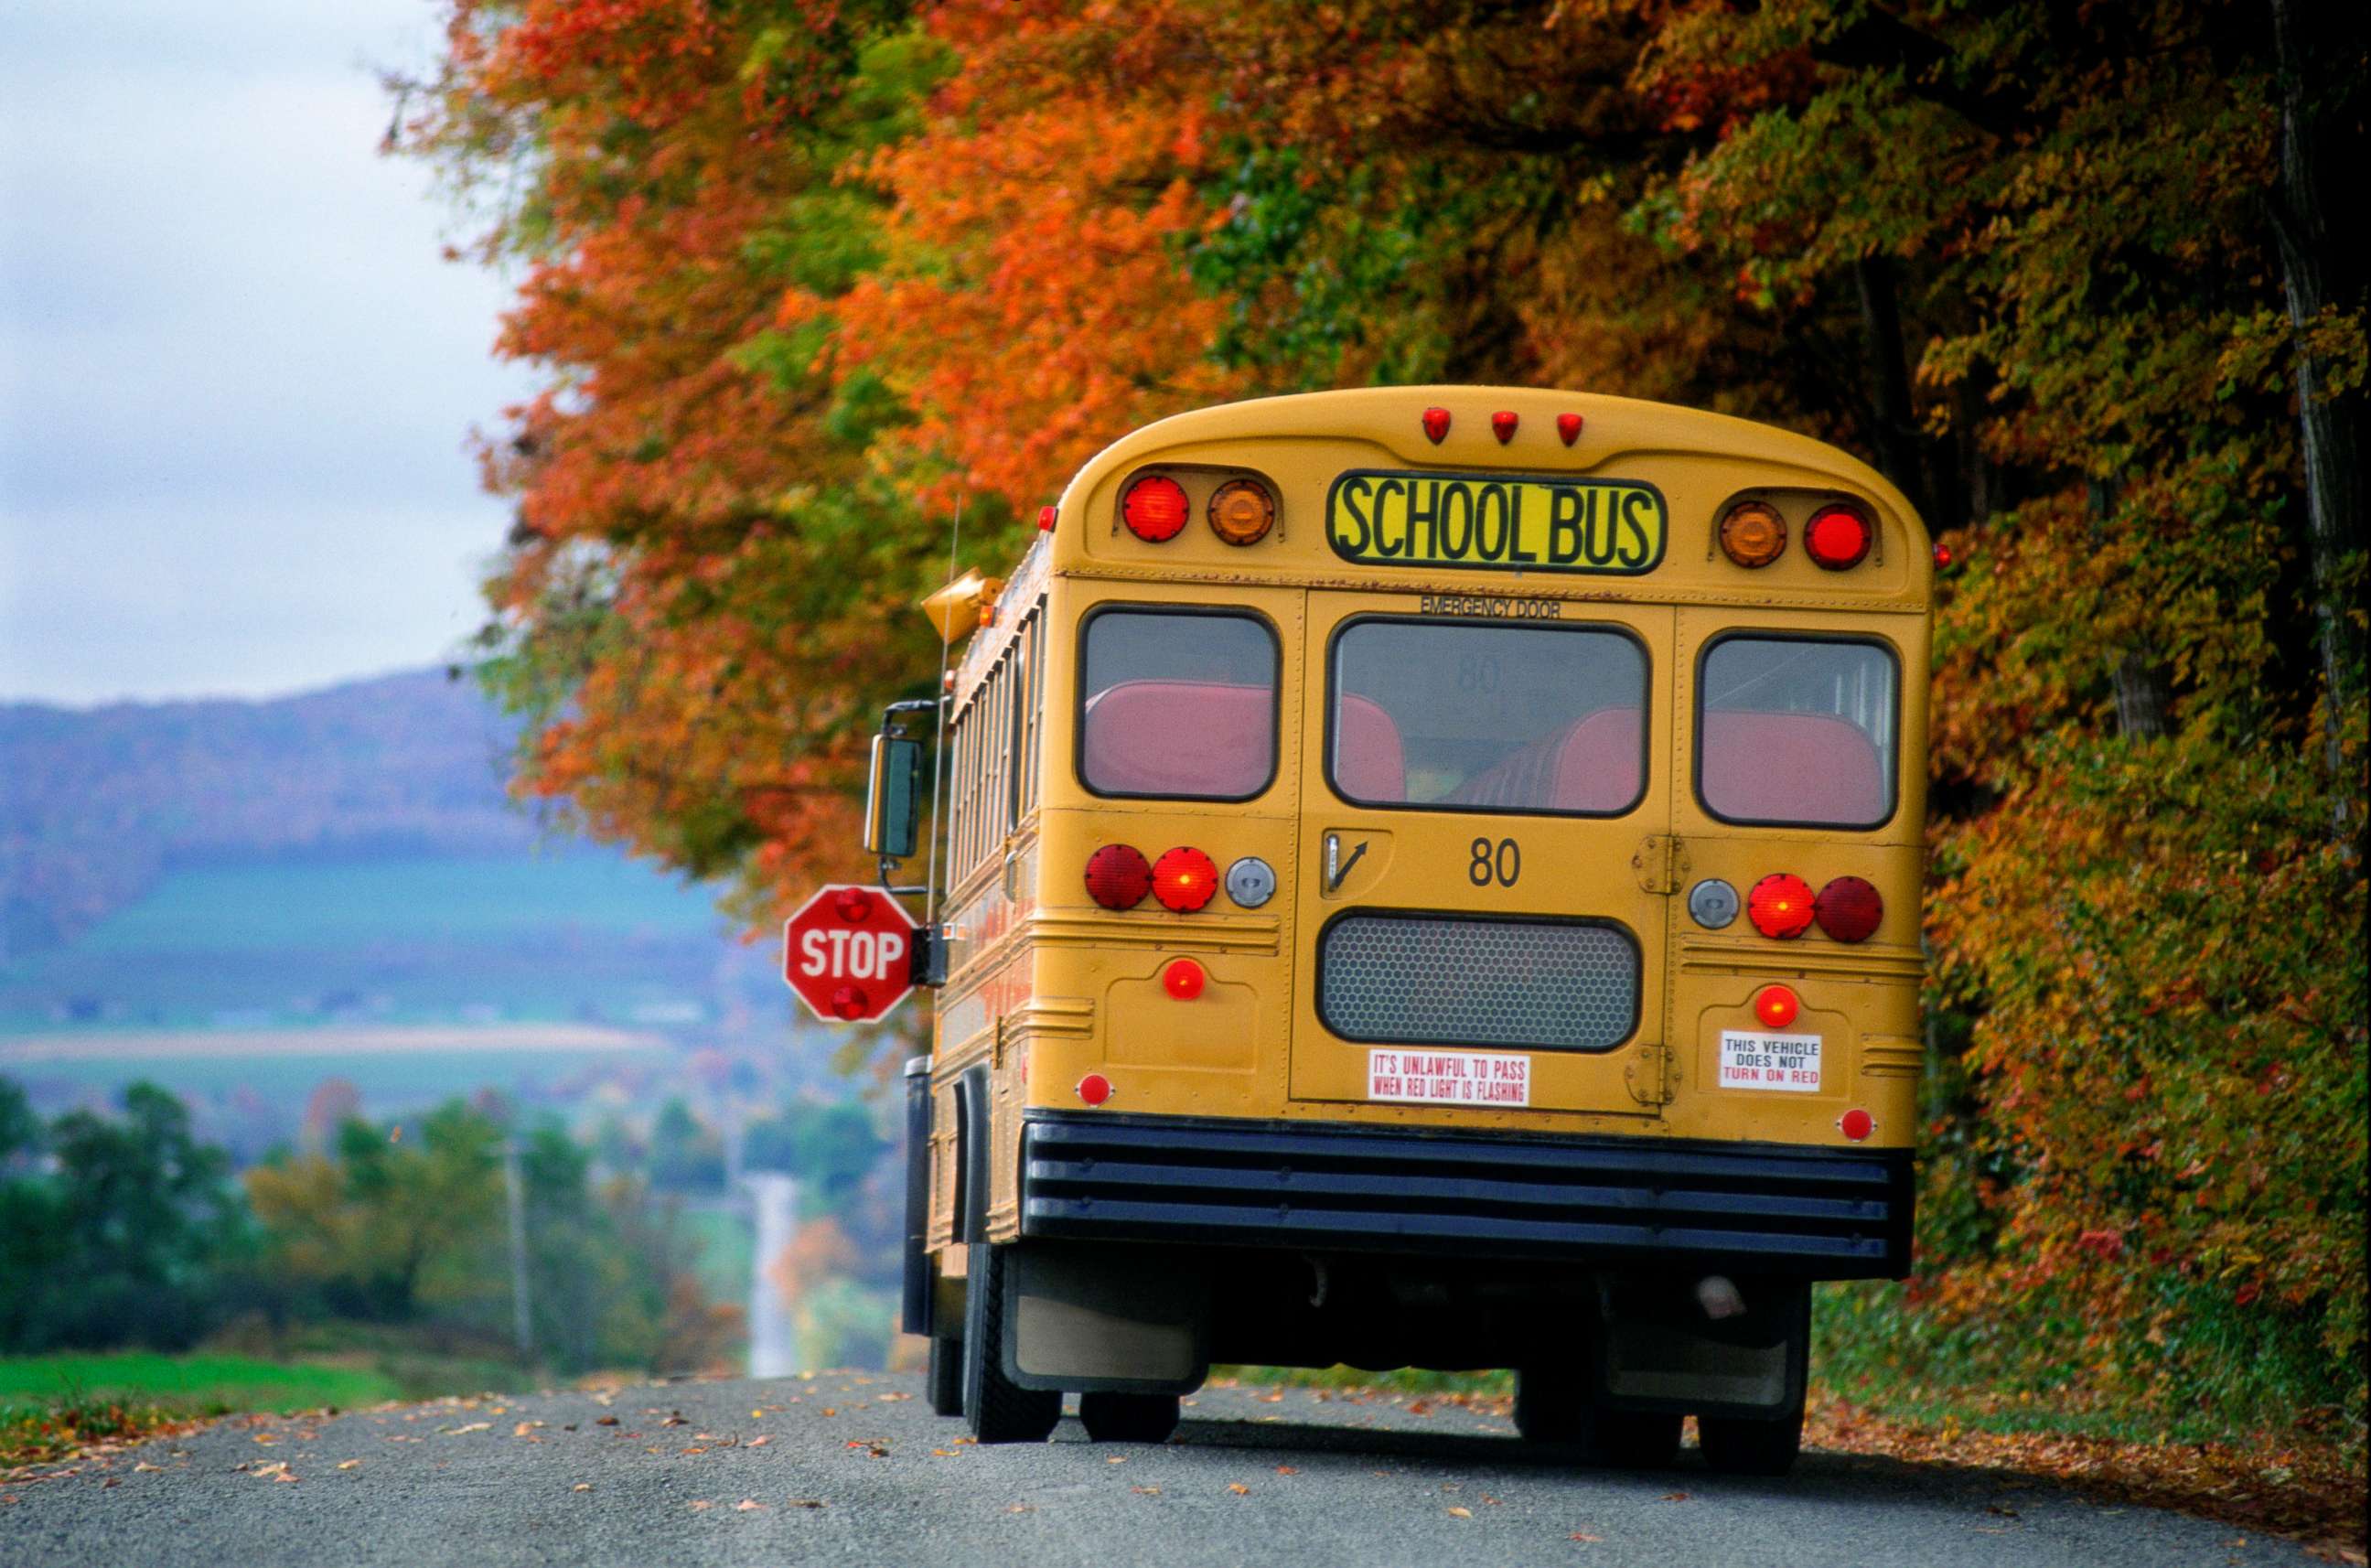 PHOTO: This stock photo depicts a school bus stopping on a road.